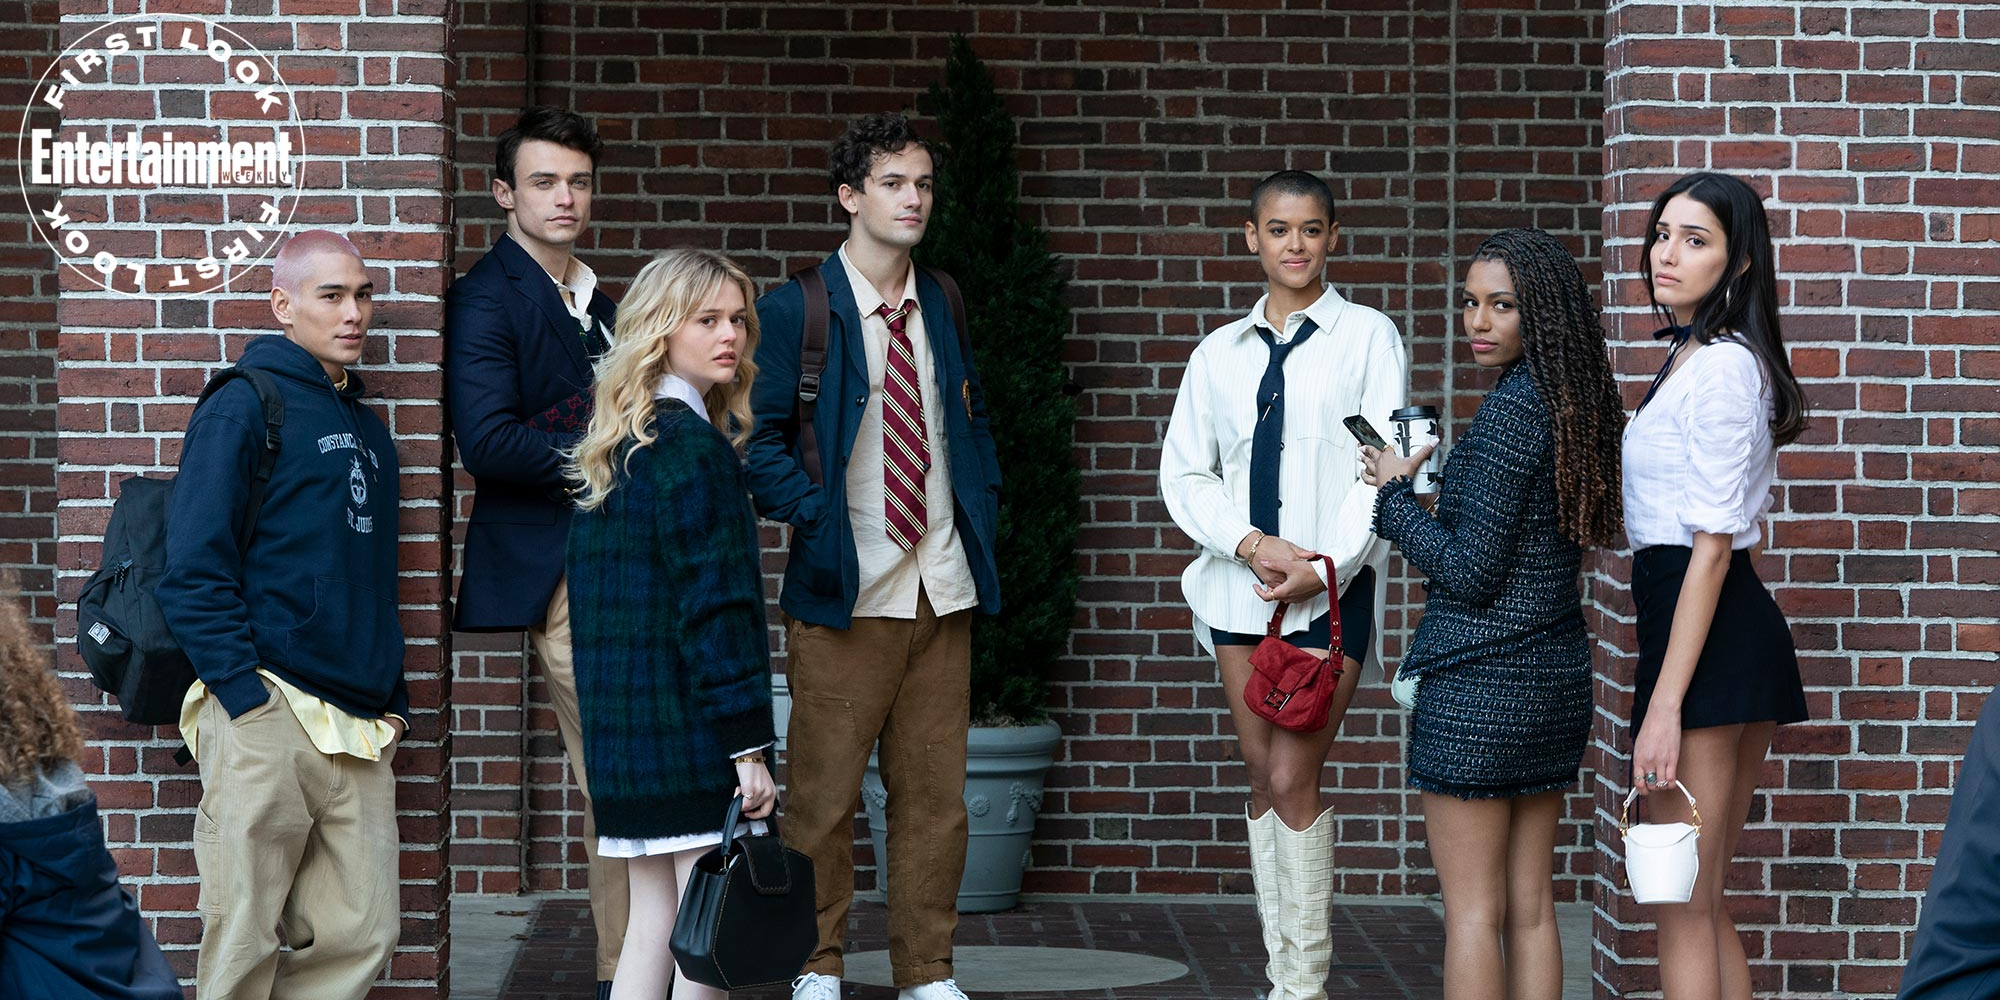 Gossip Girl' Reboot: All the New Details on the HBO Max Series (Exclusive)